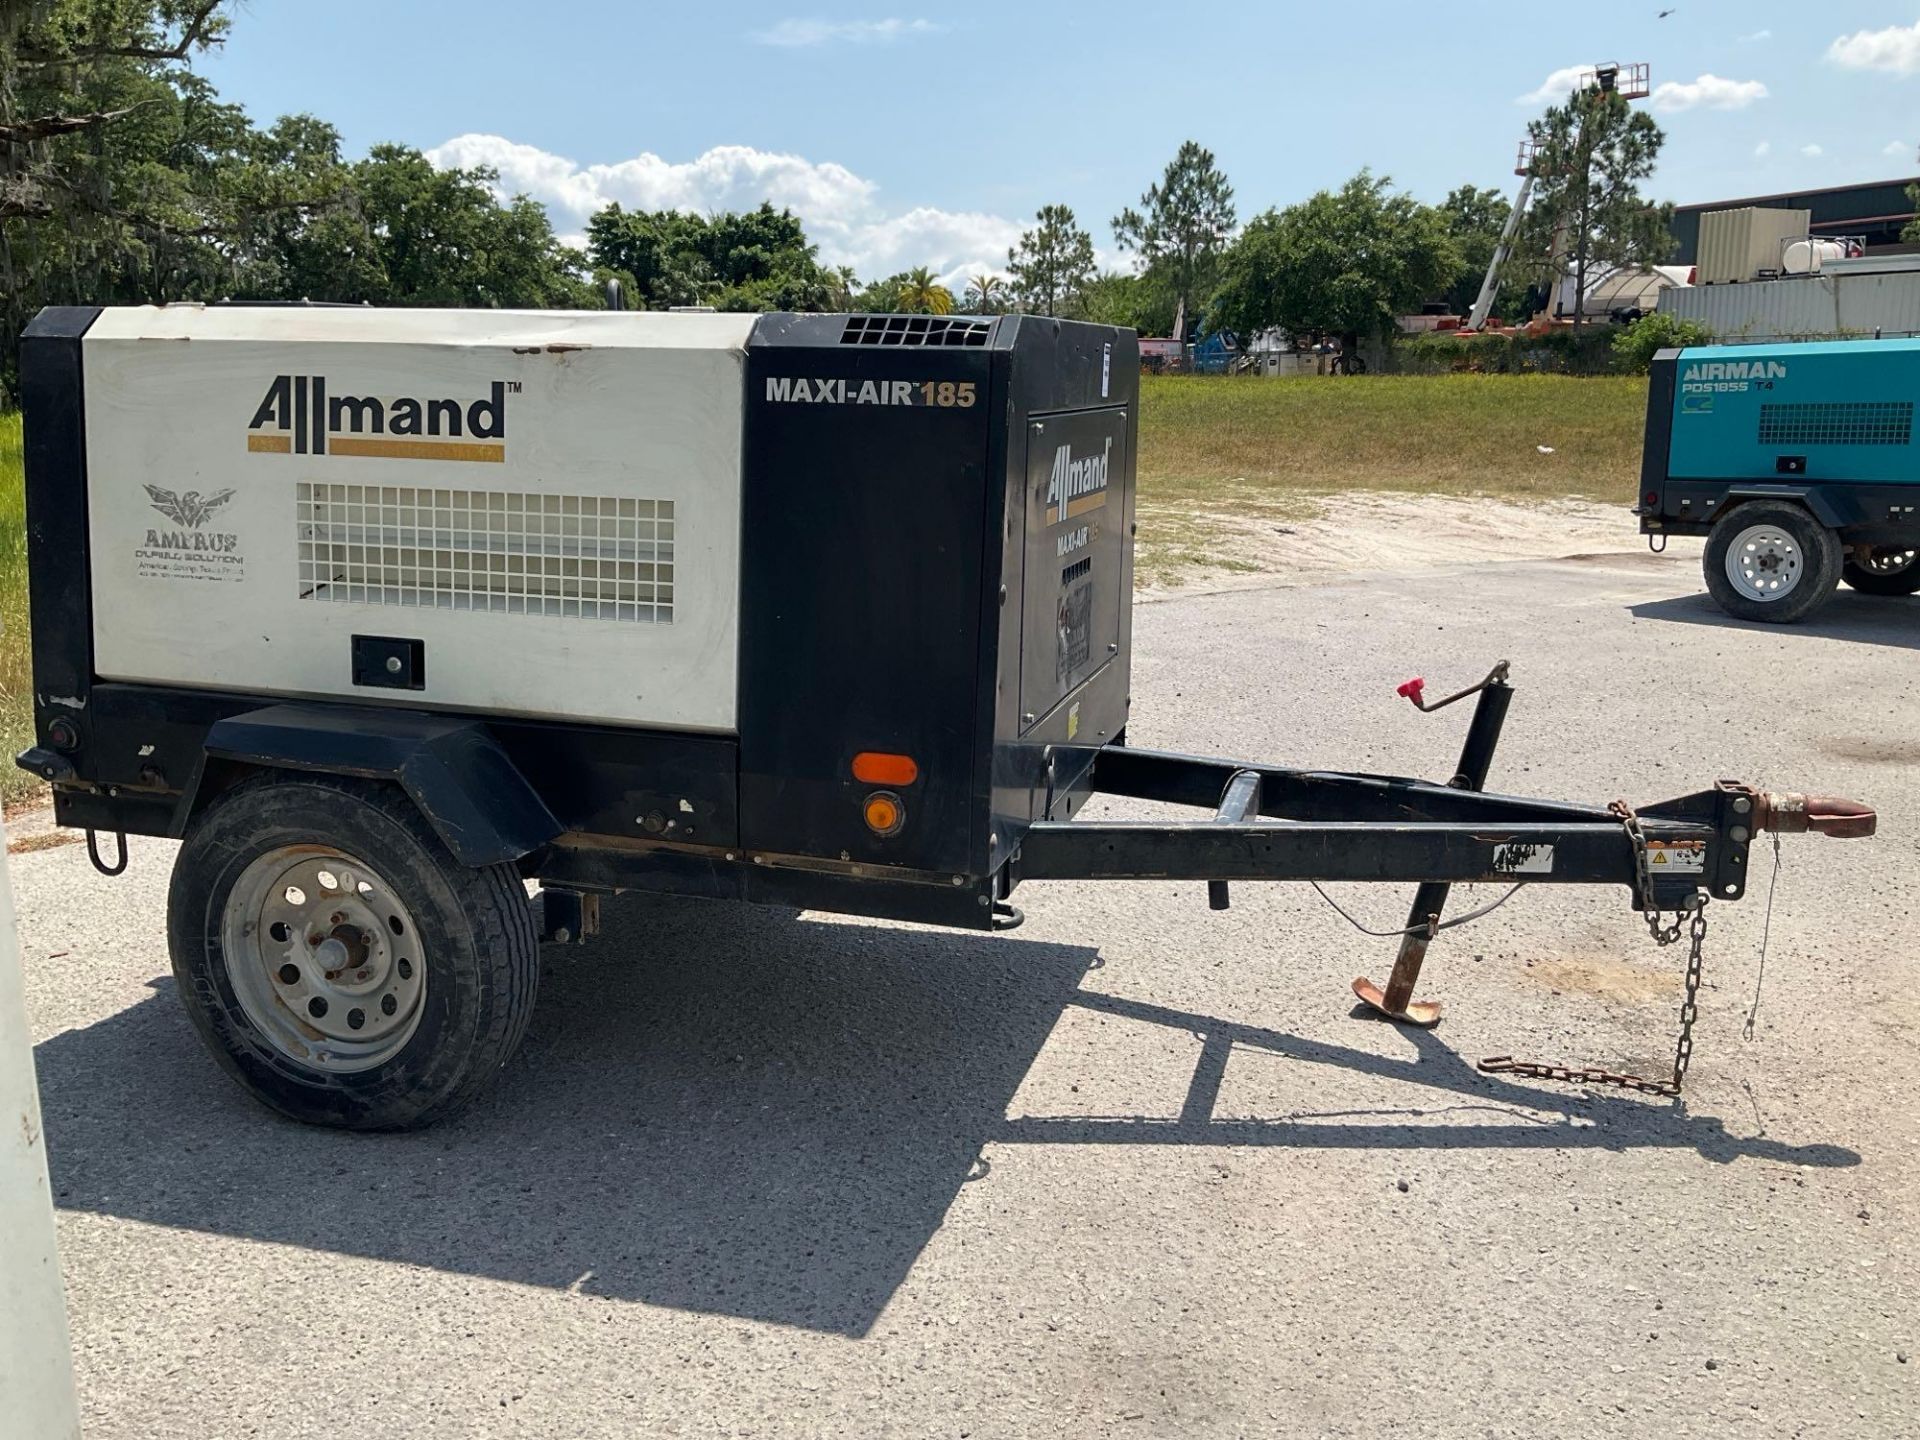 2018/2019 ALLMAND MAXI-POWER MA185-6E1 COMPRESSOR, DIESEL, TRAILER MOUNTED, NORMAL OPERATING - Image 9 of 14